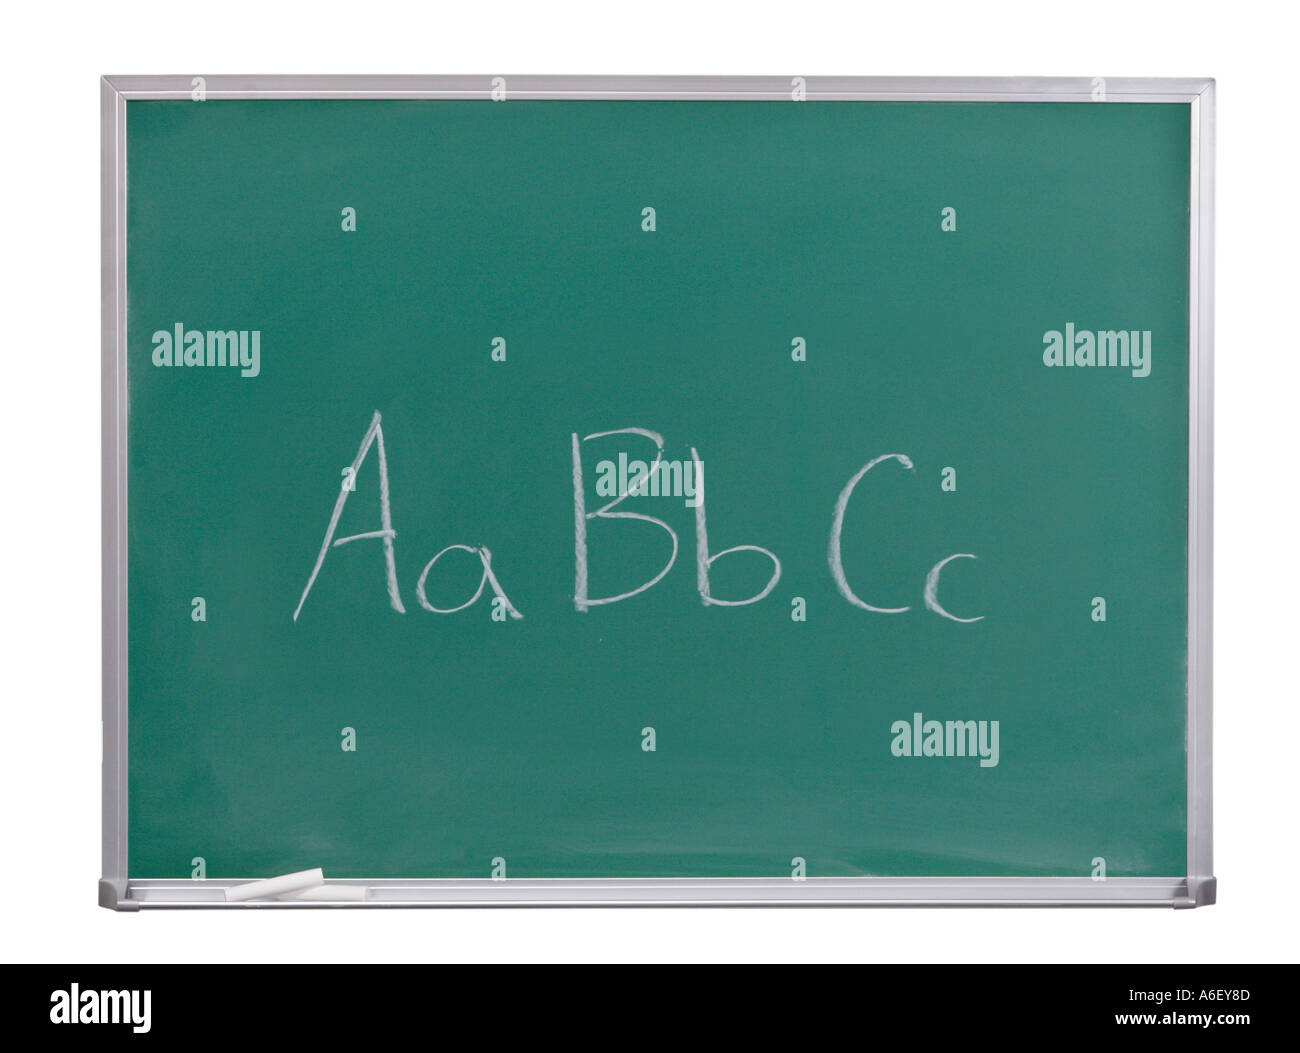 Aa bb cc written on chalkboard Banque D'Images